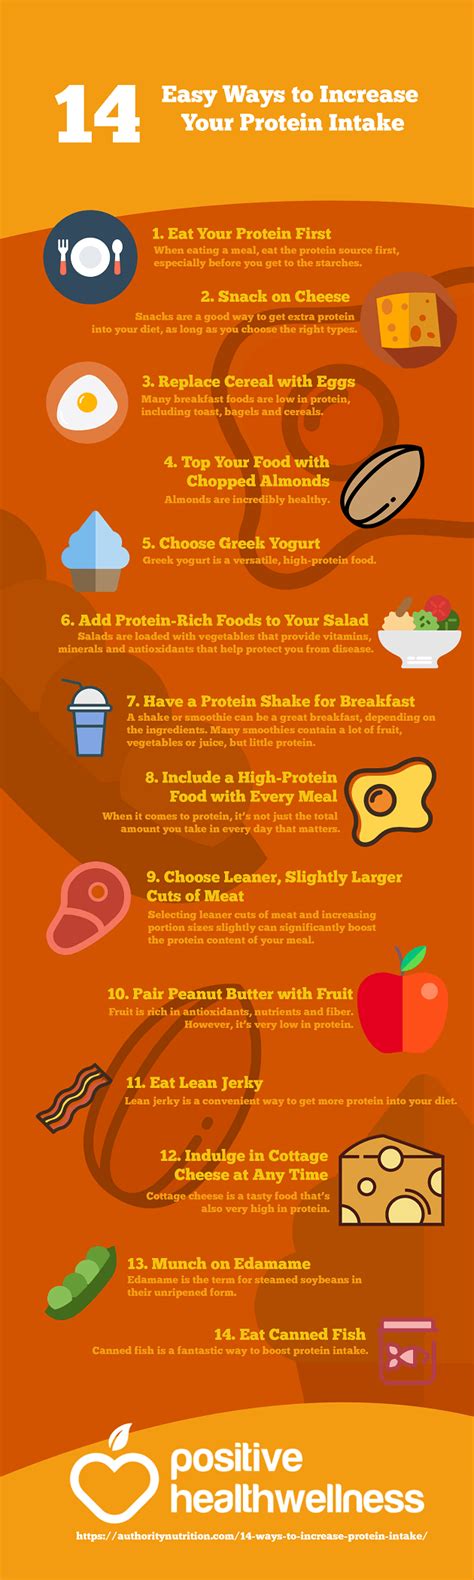 14 Easy Ways To Increase Your Protein Intake Infographic